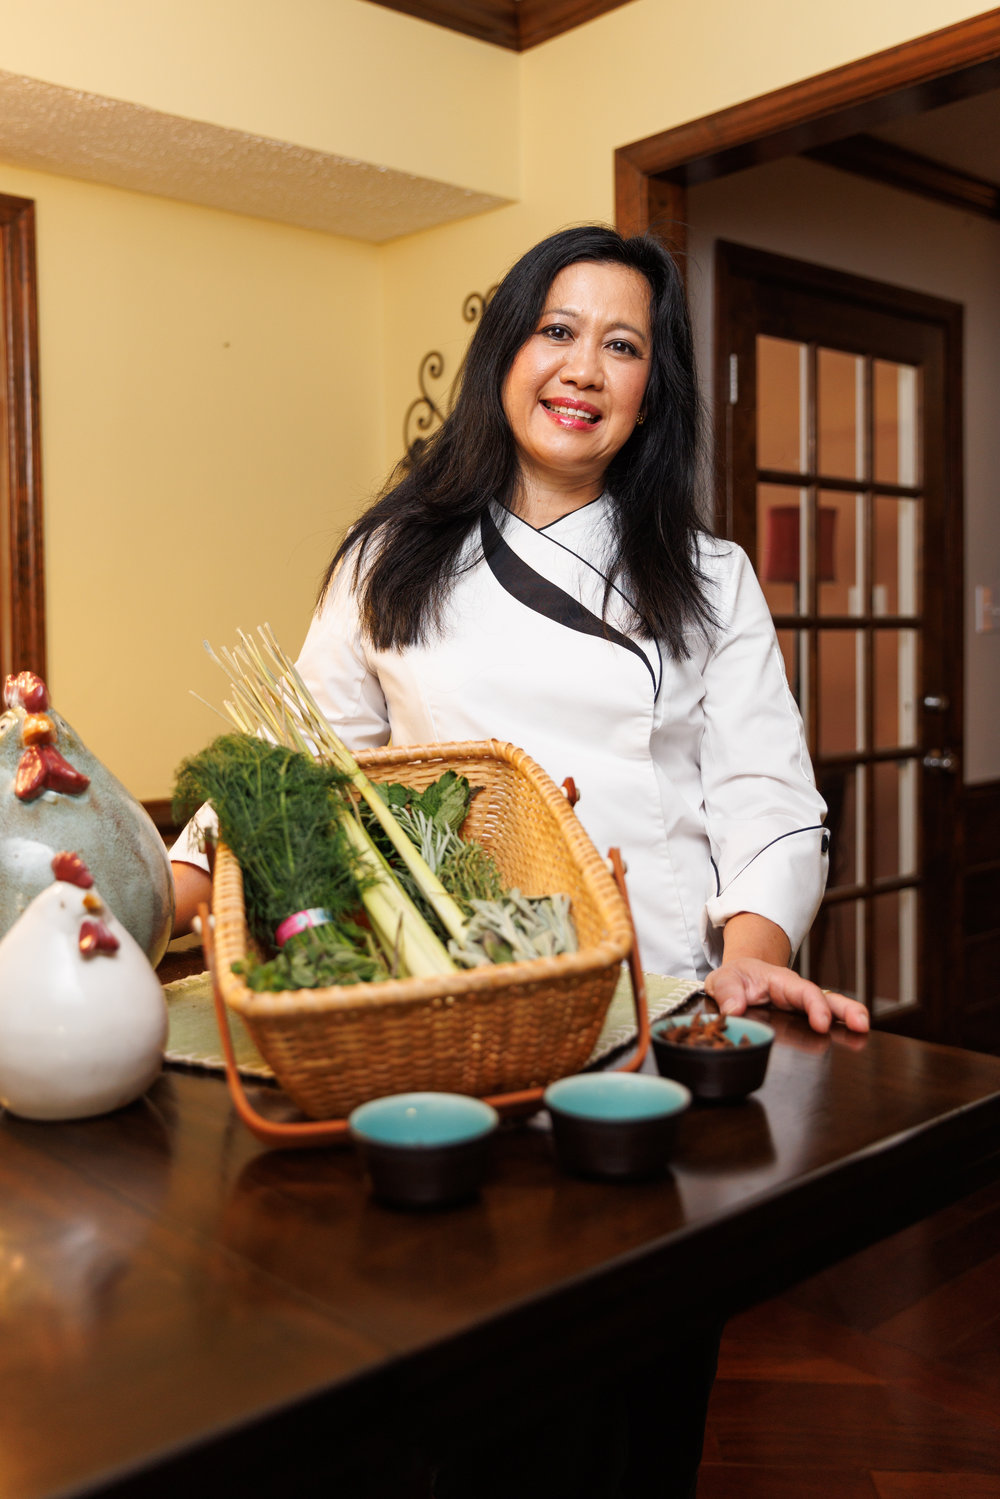 For family meals, personal chef Mei Parker crafts a “boutique menu” that is fitted to personal tastes after a conversation about food favorites with her customer.